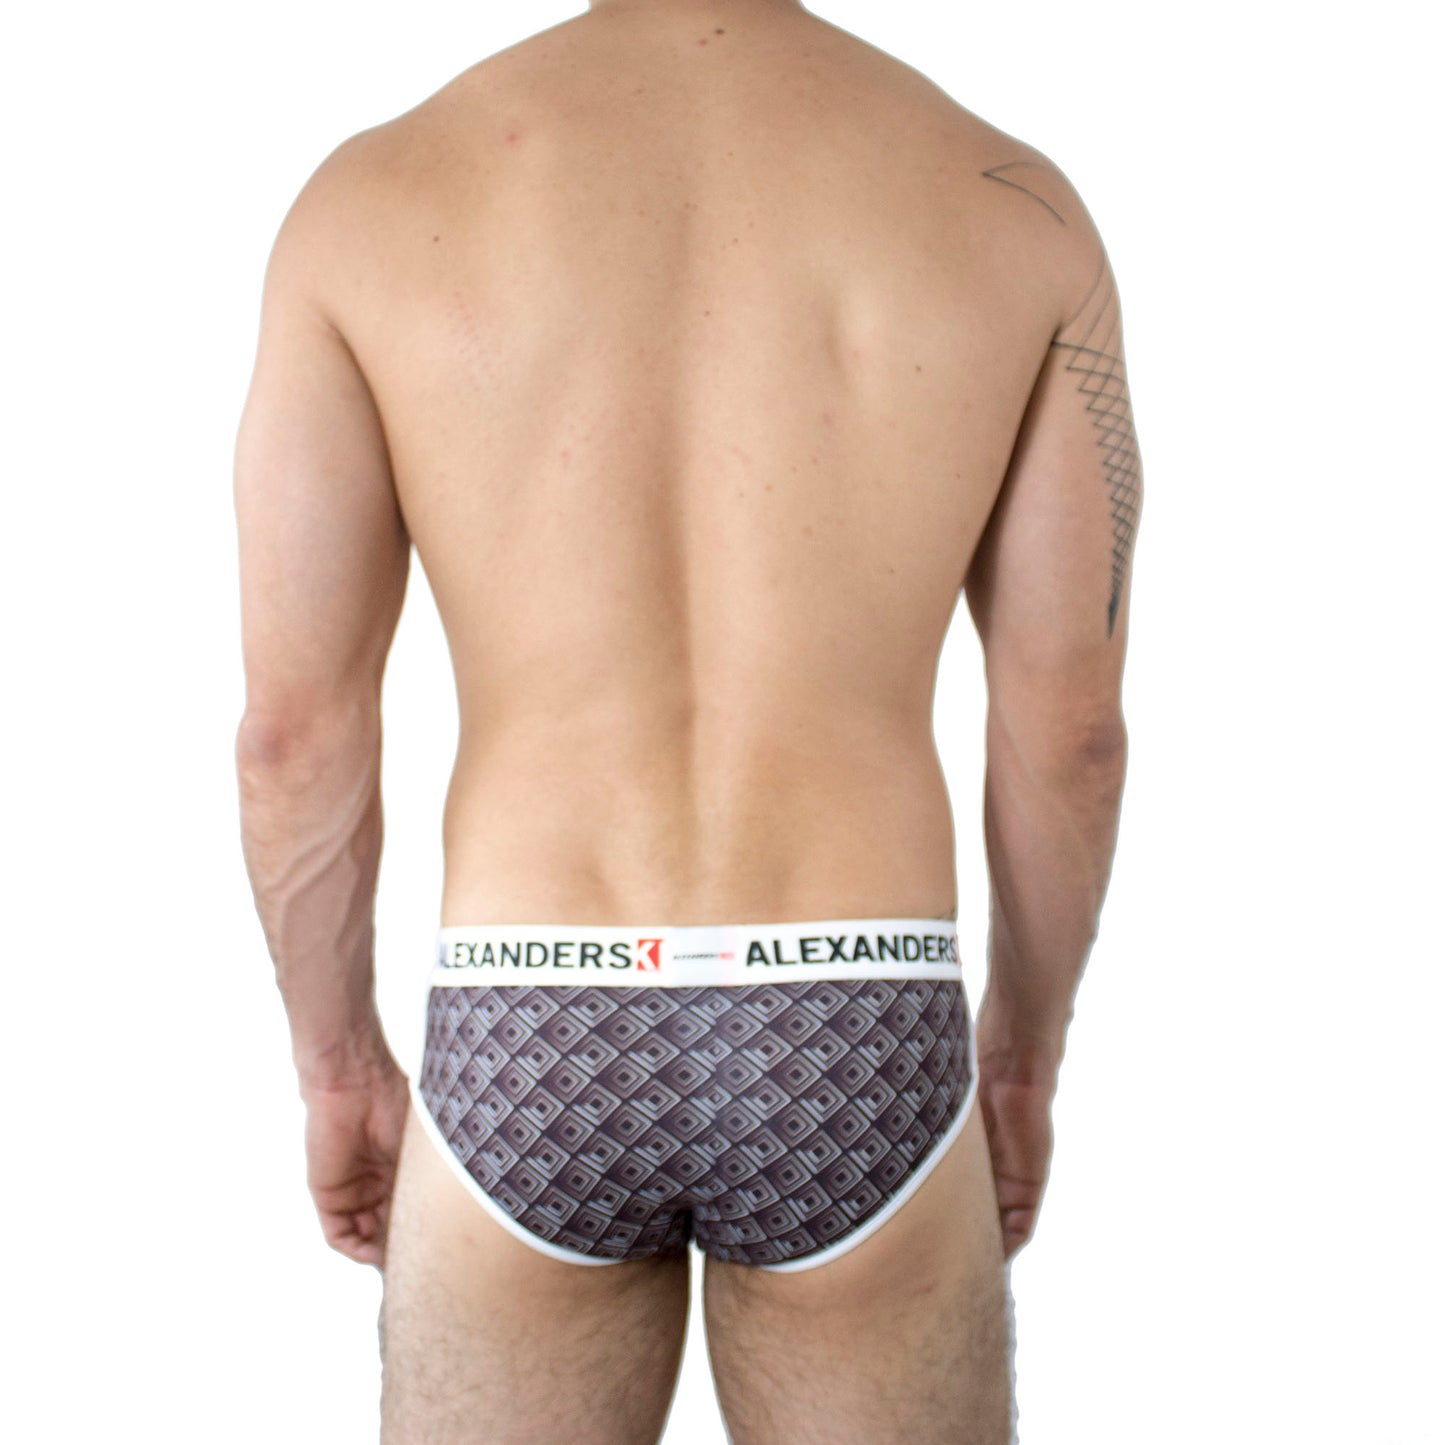 TP0178 Brief Wiwen Checkered Print Black with Gray Skinit Alexanders King